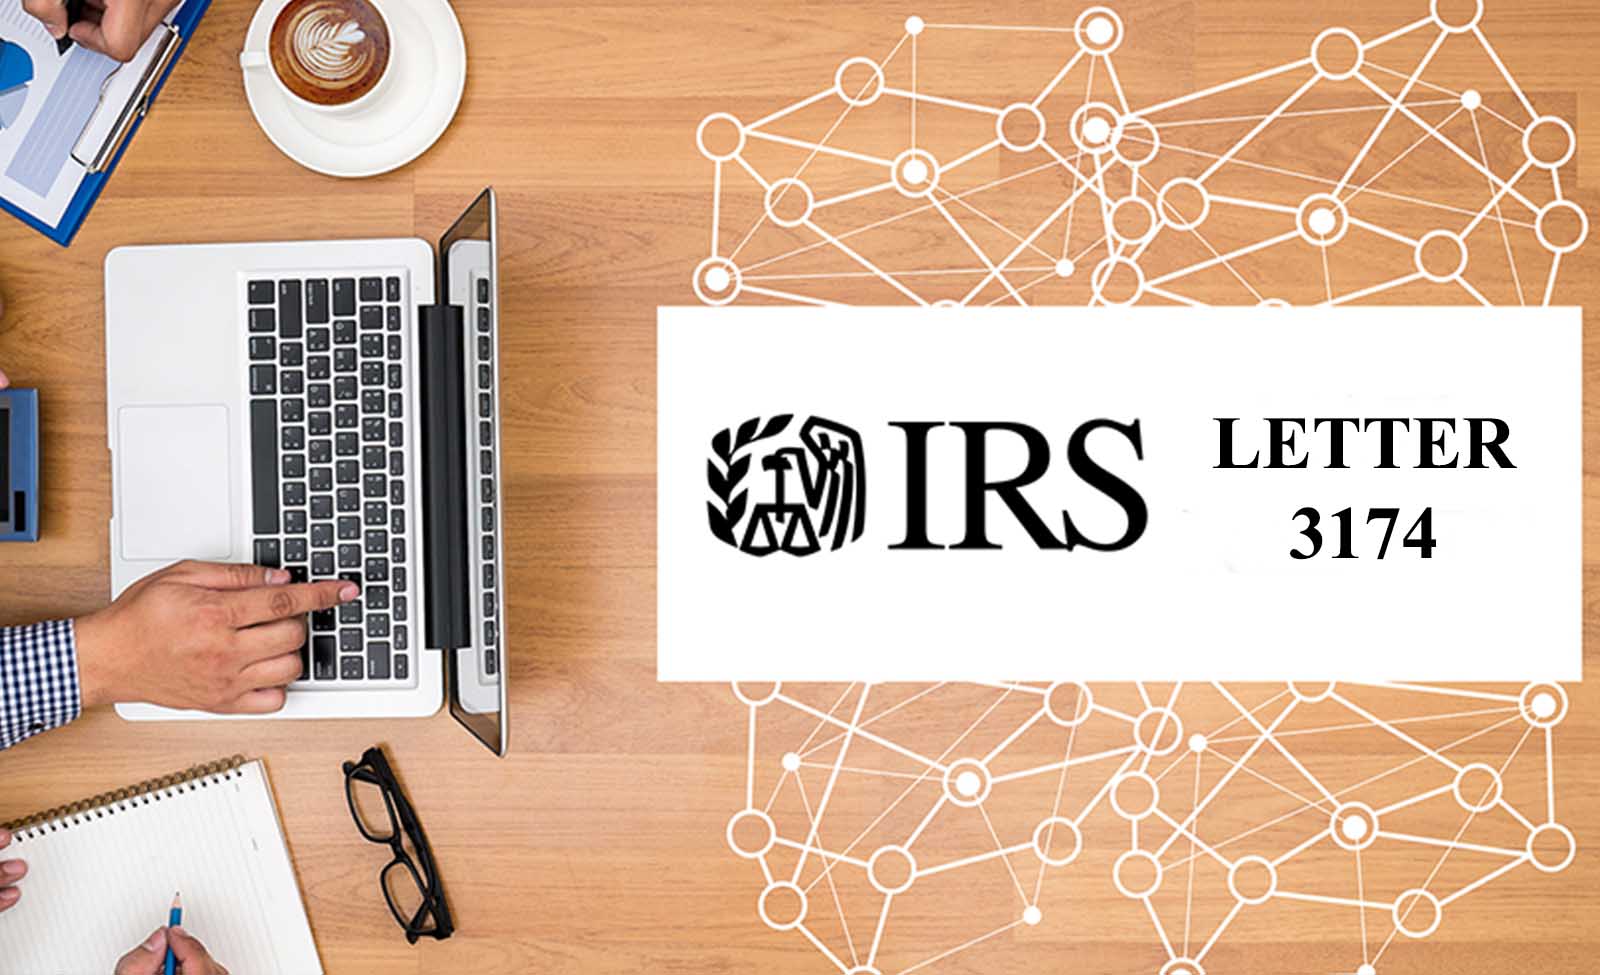 How to Respond to IRS Letter 3174